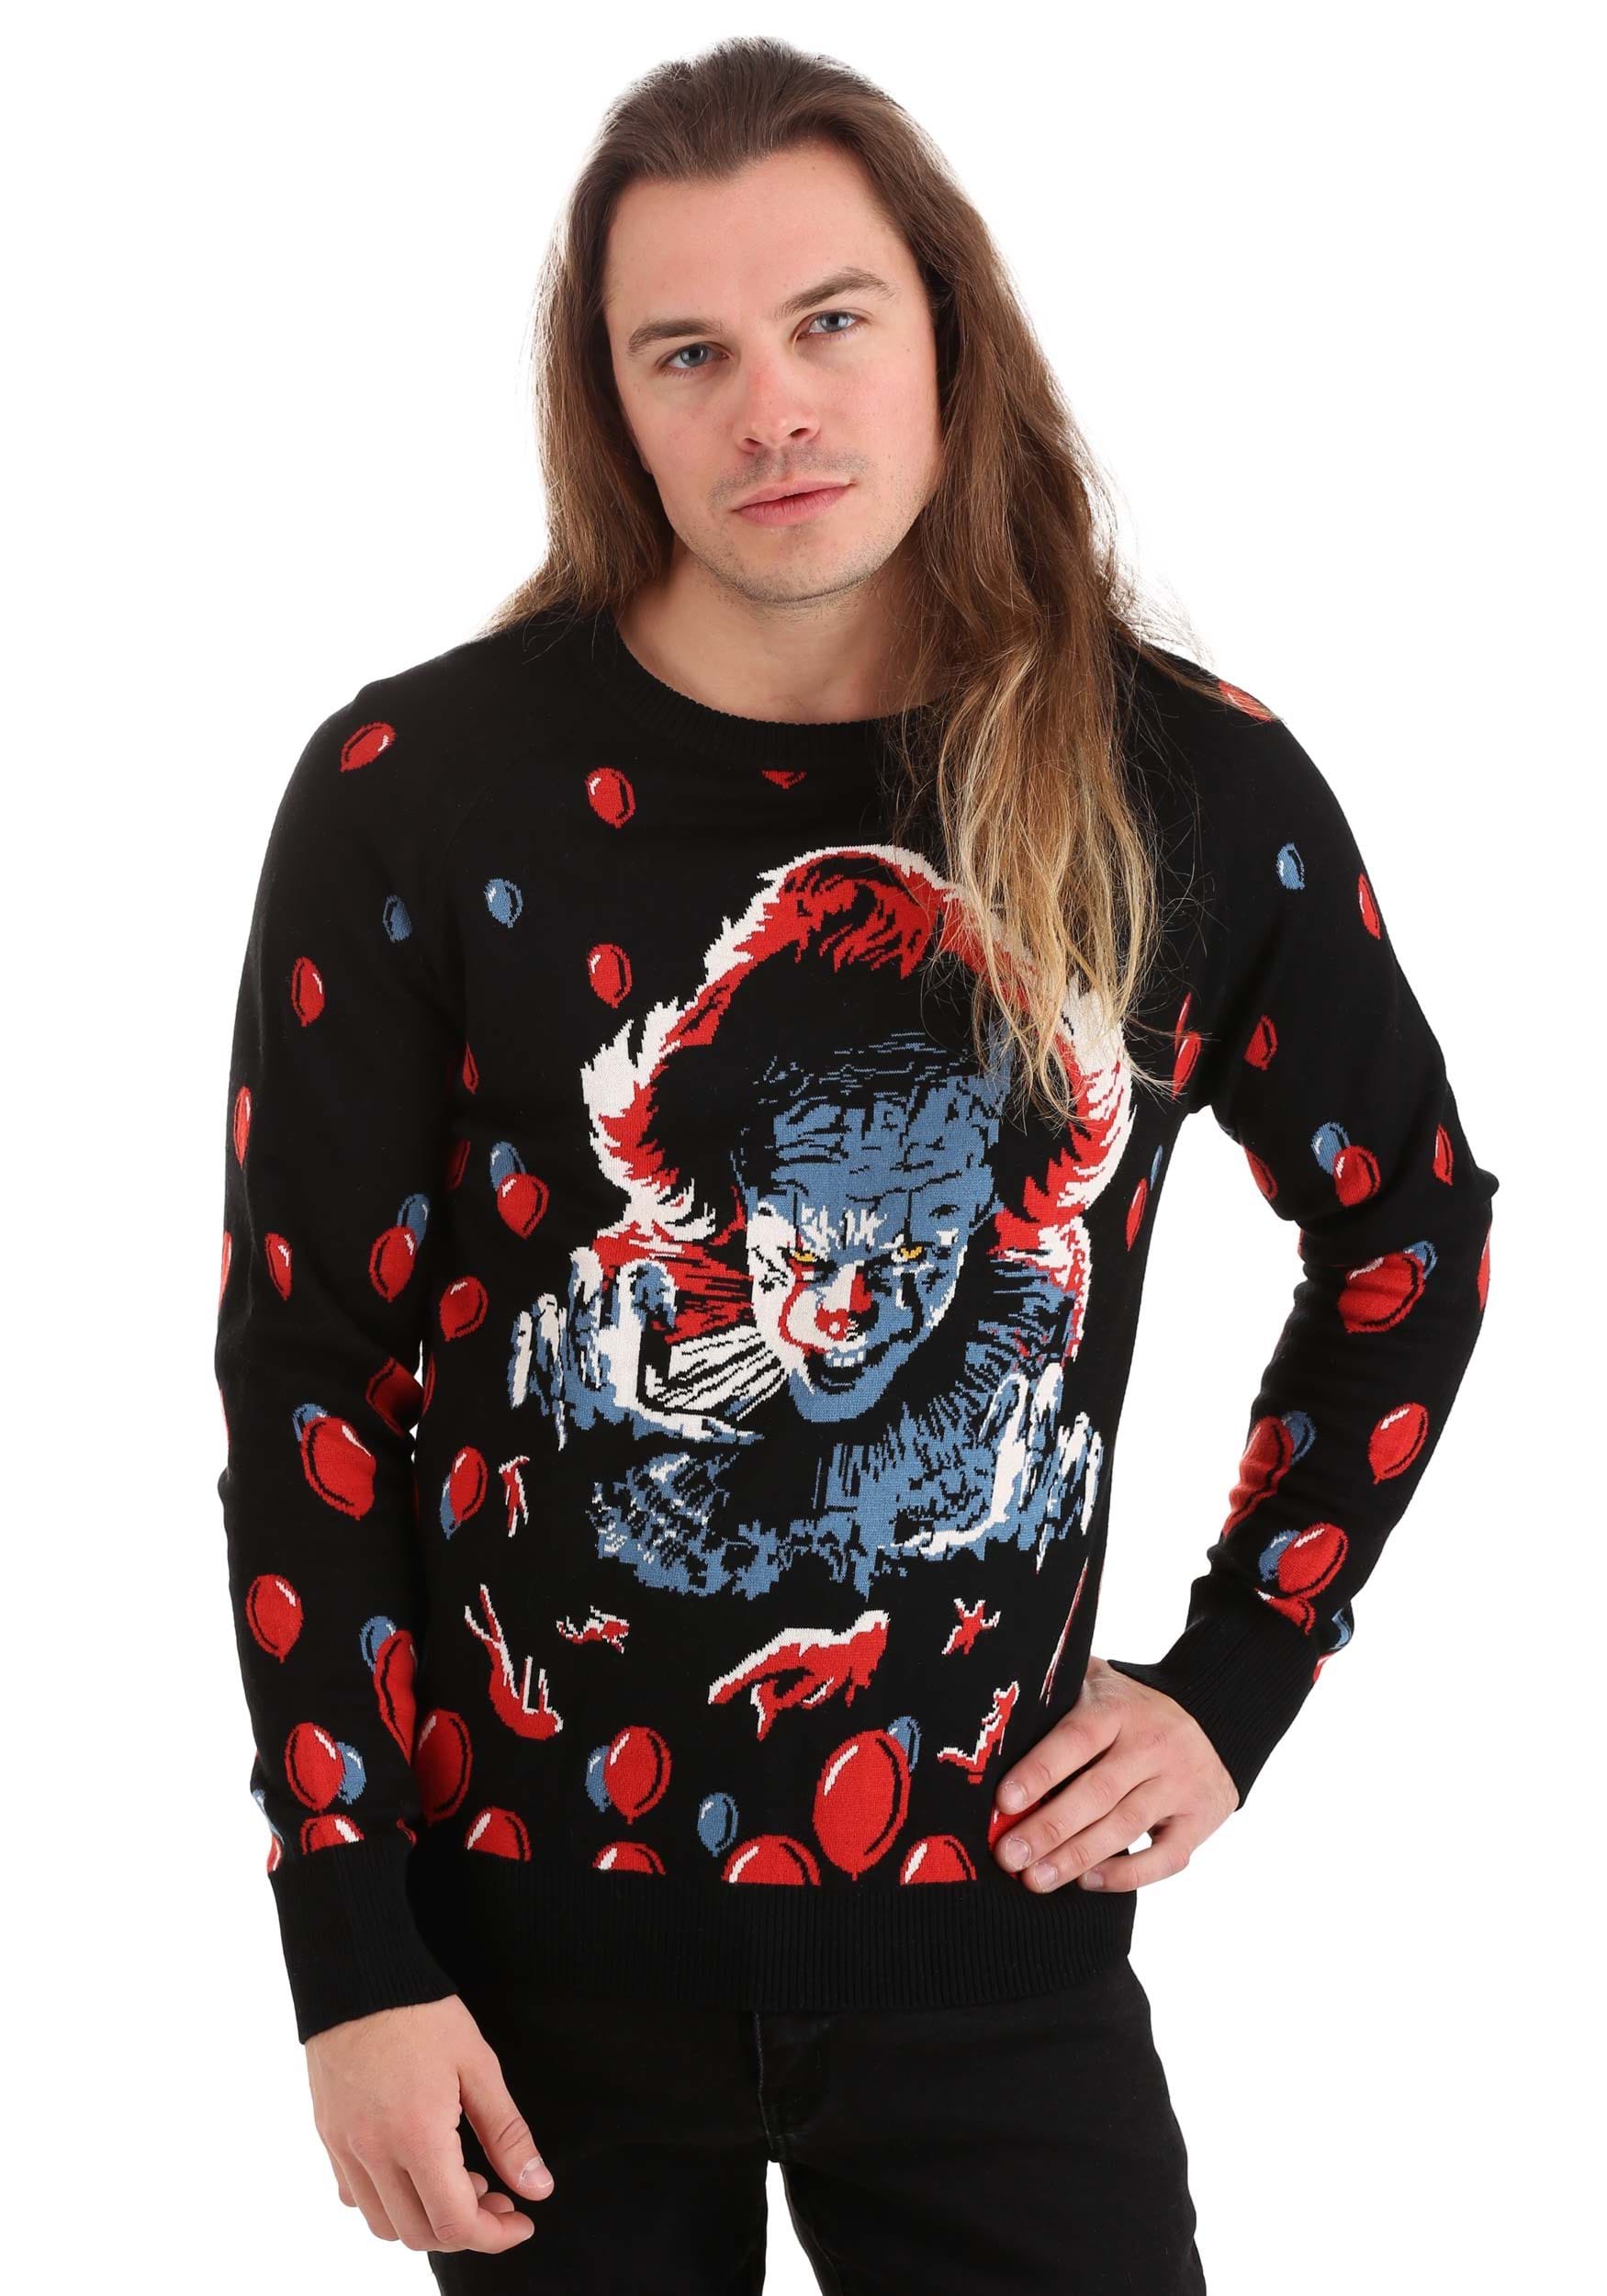 IT (2019) Pennywise Adult Ugly Sweater